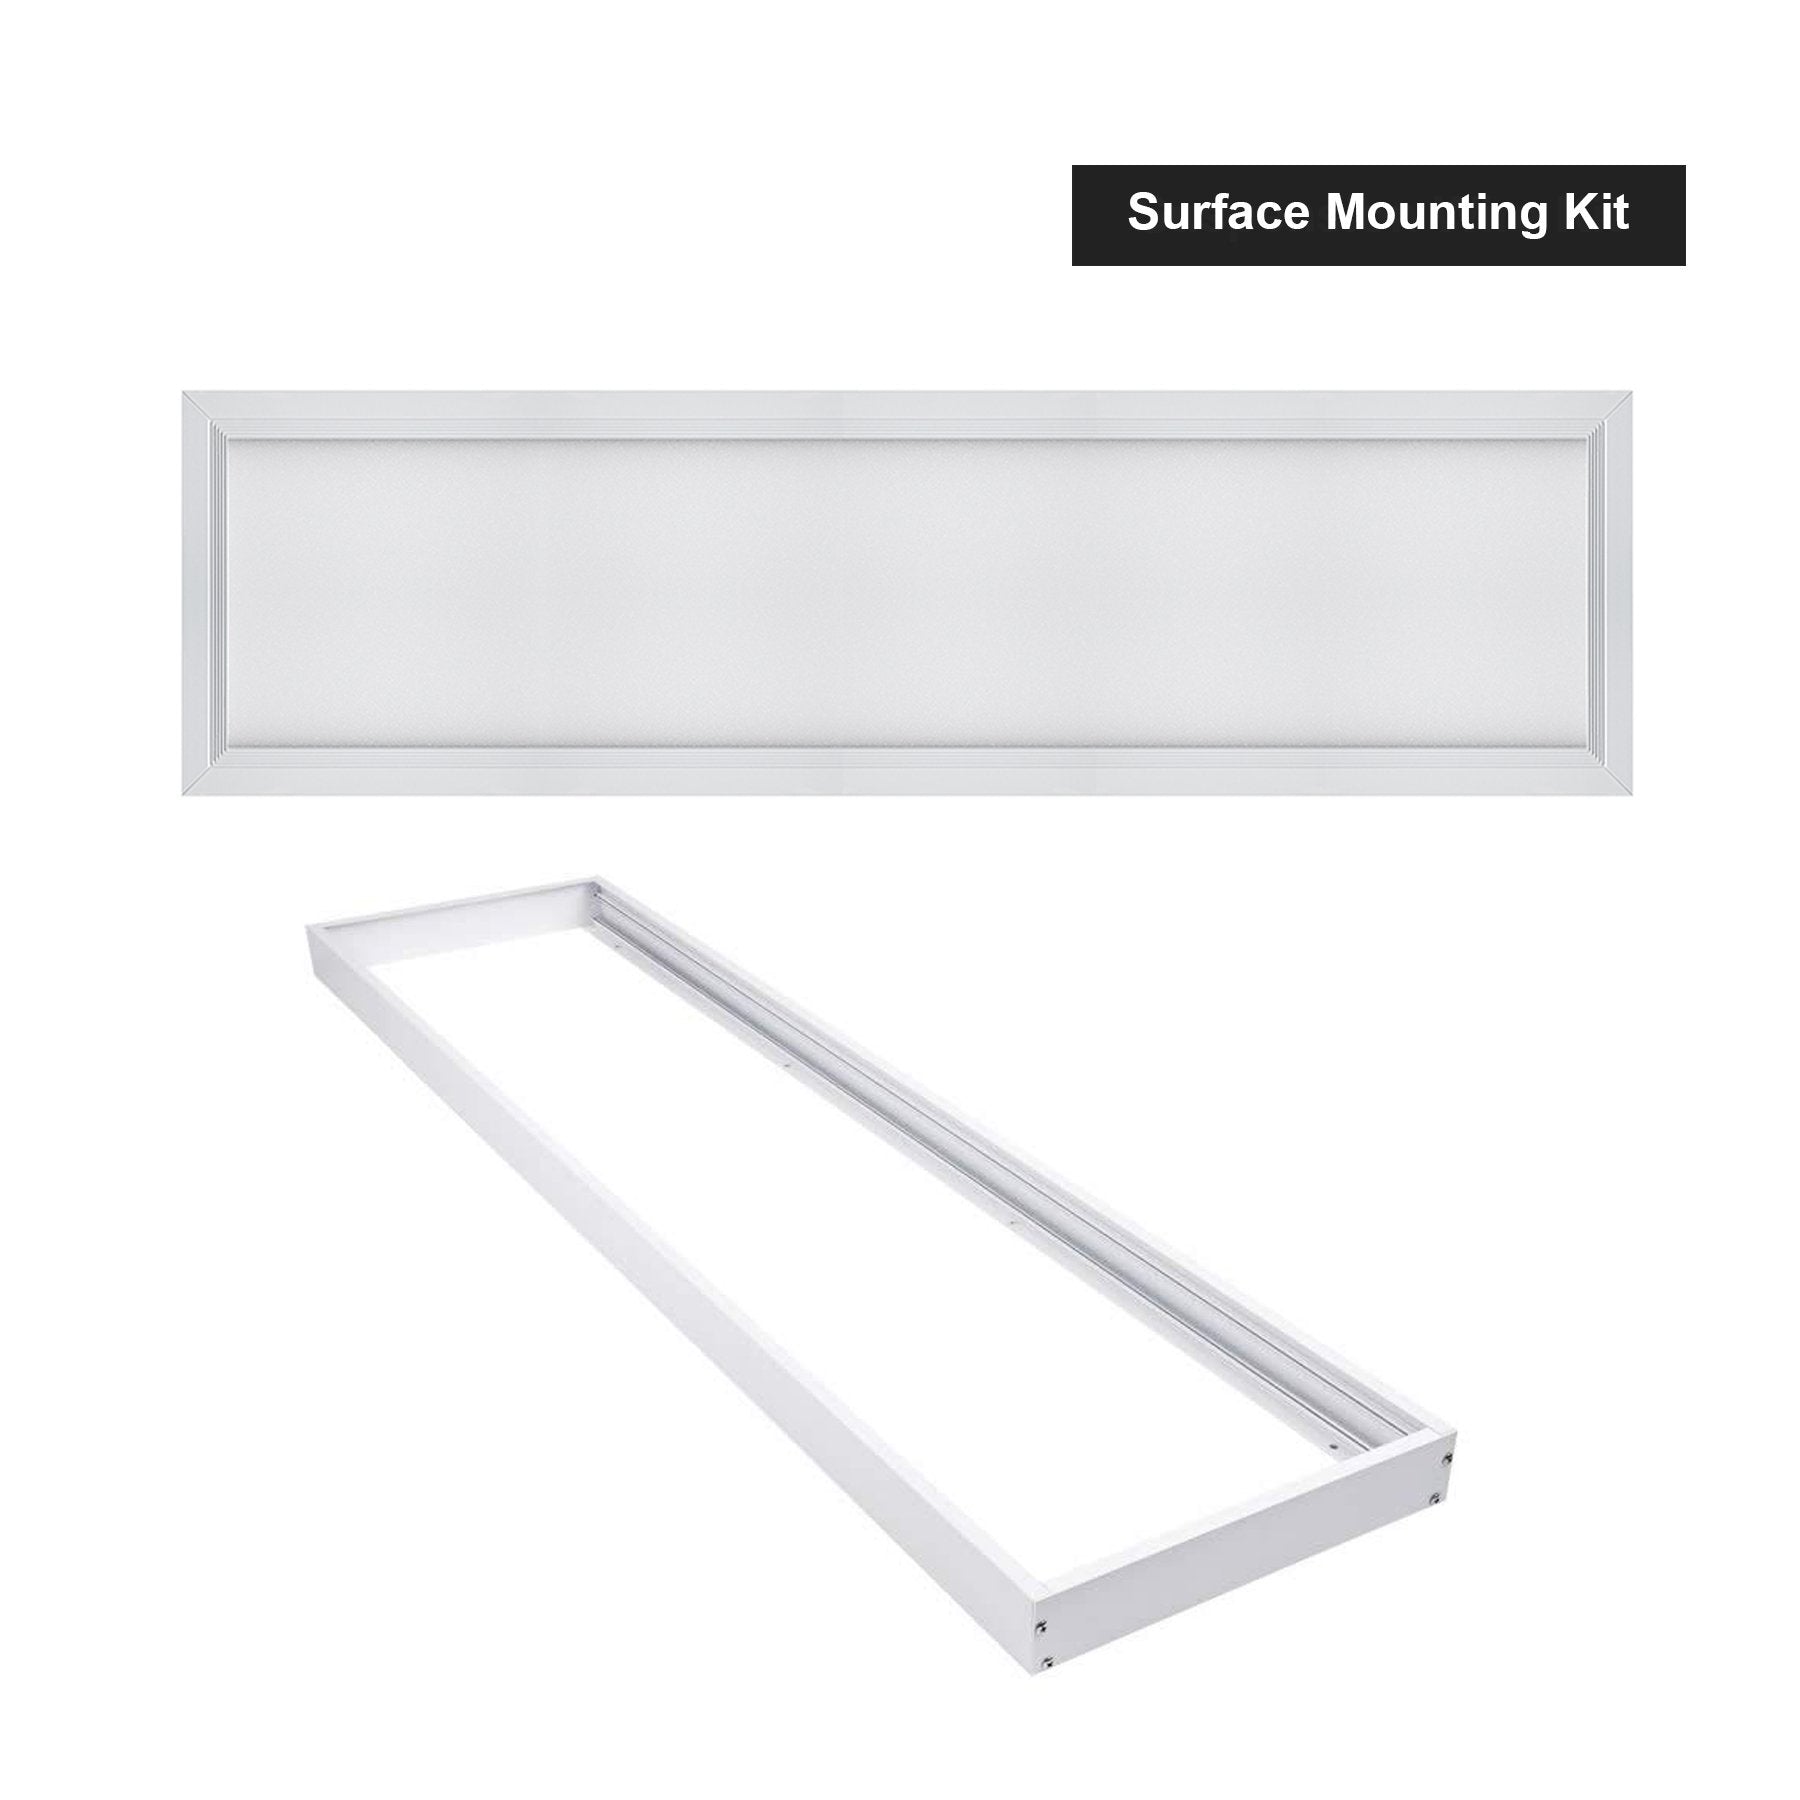 G.W.S LED Wholesale 1195x295mm LED Panel Lights Surface Mounted (With Mounting Frame Kit) / Neutral White (4000K) / No 1195x295mm 42W White Frame LED Panel Light